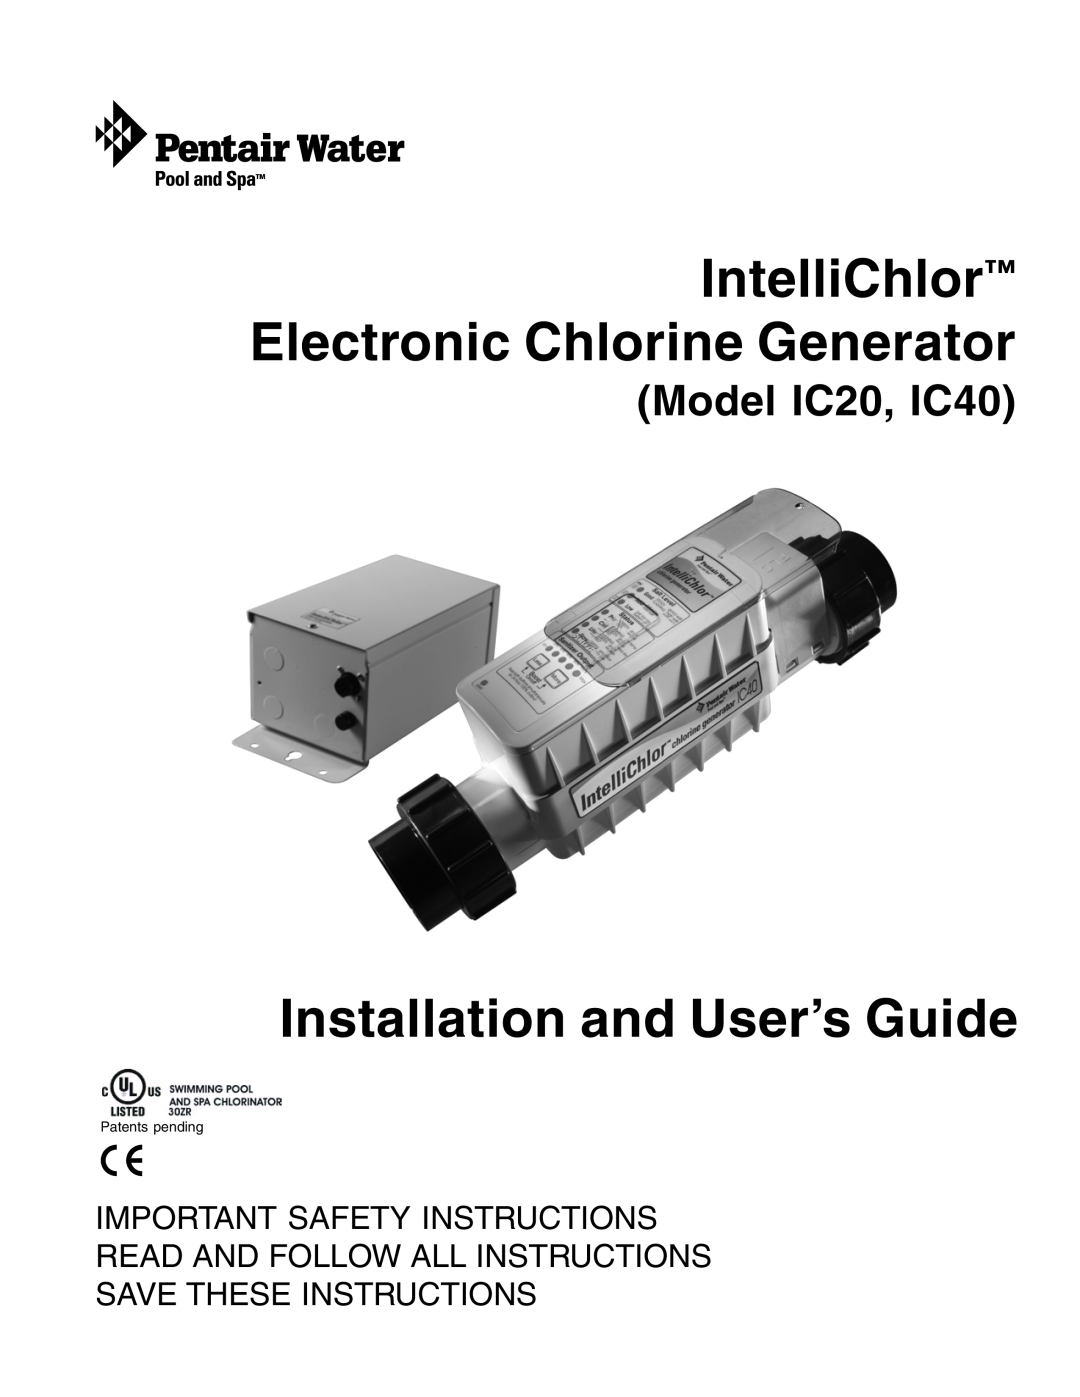 Pentair important safety instructions Model IC20, IC40, IntelliChlor Electronic Chlorine Generator 